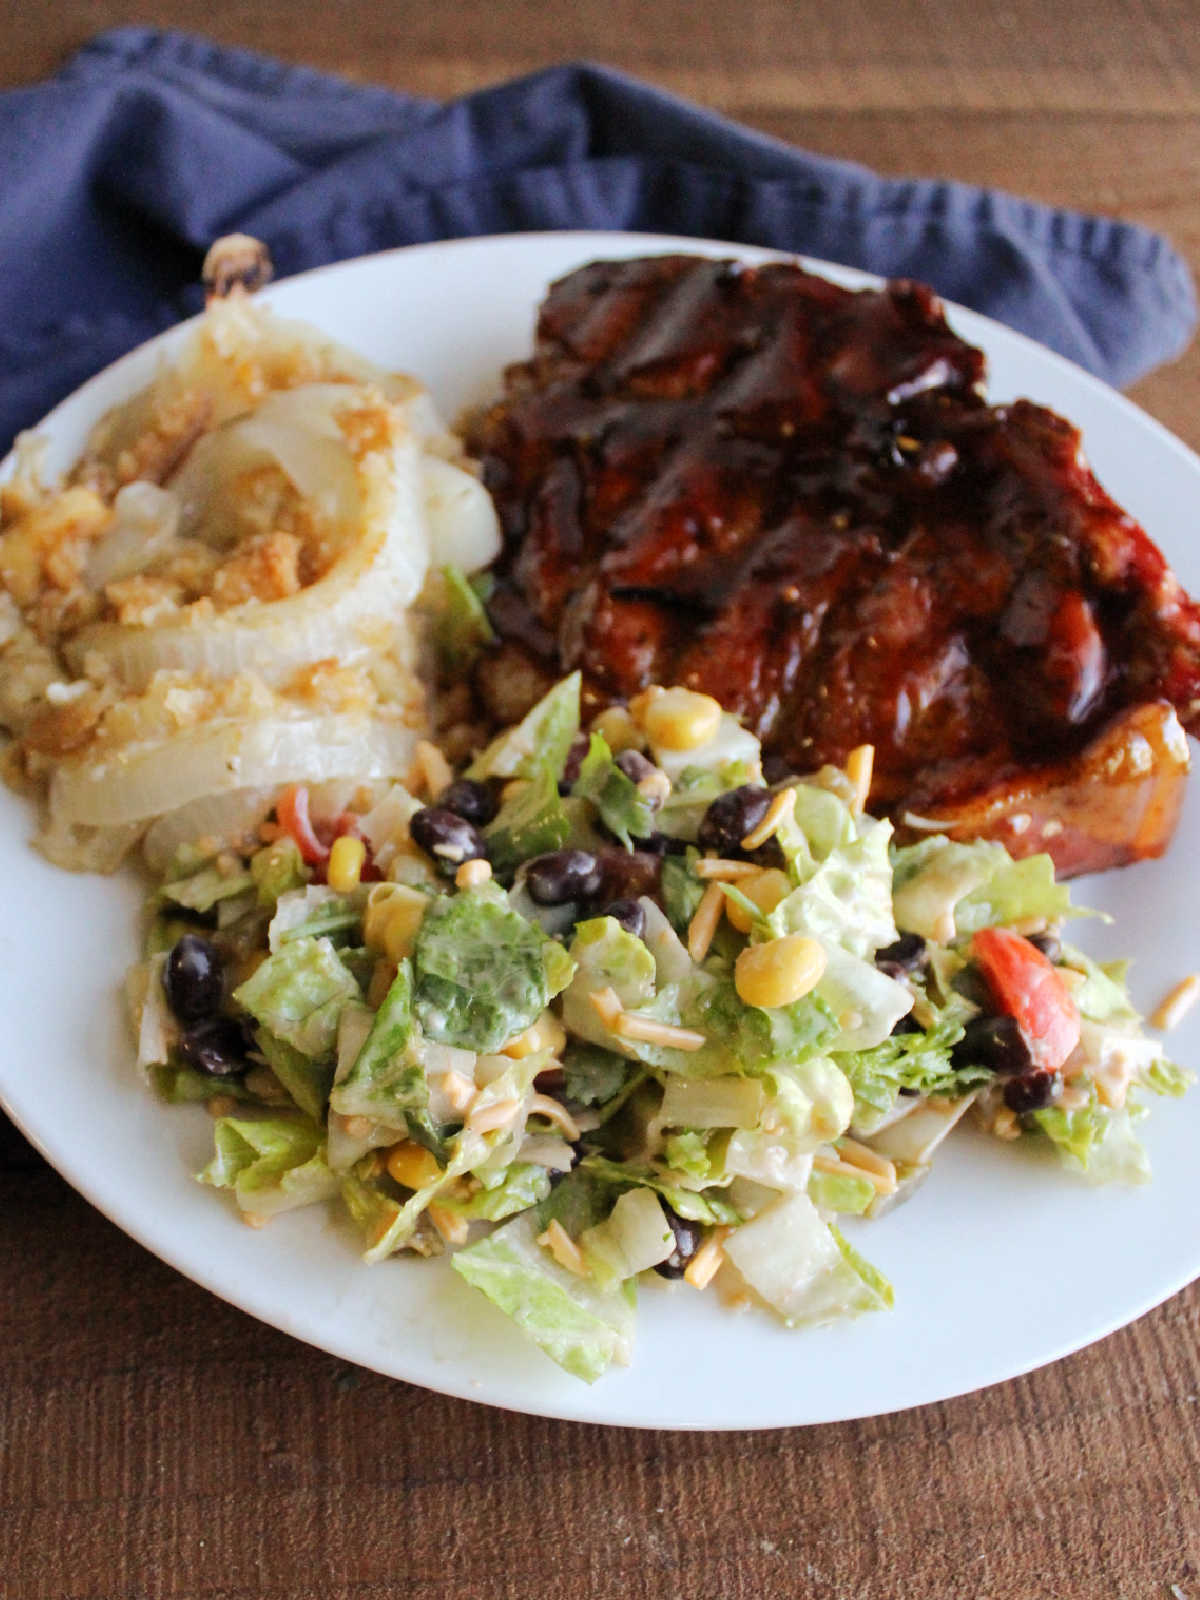 Cowboy salad on dinner plate served with a bbq pork chop and cheesy onion casserole.